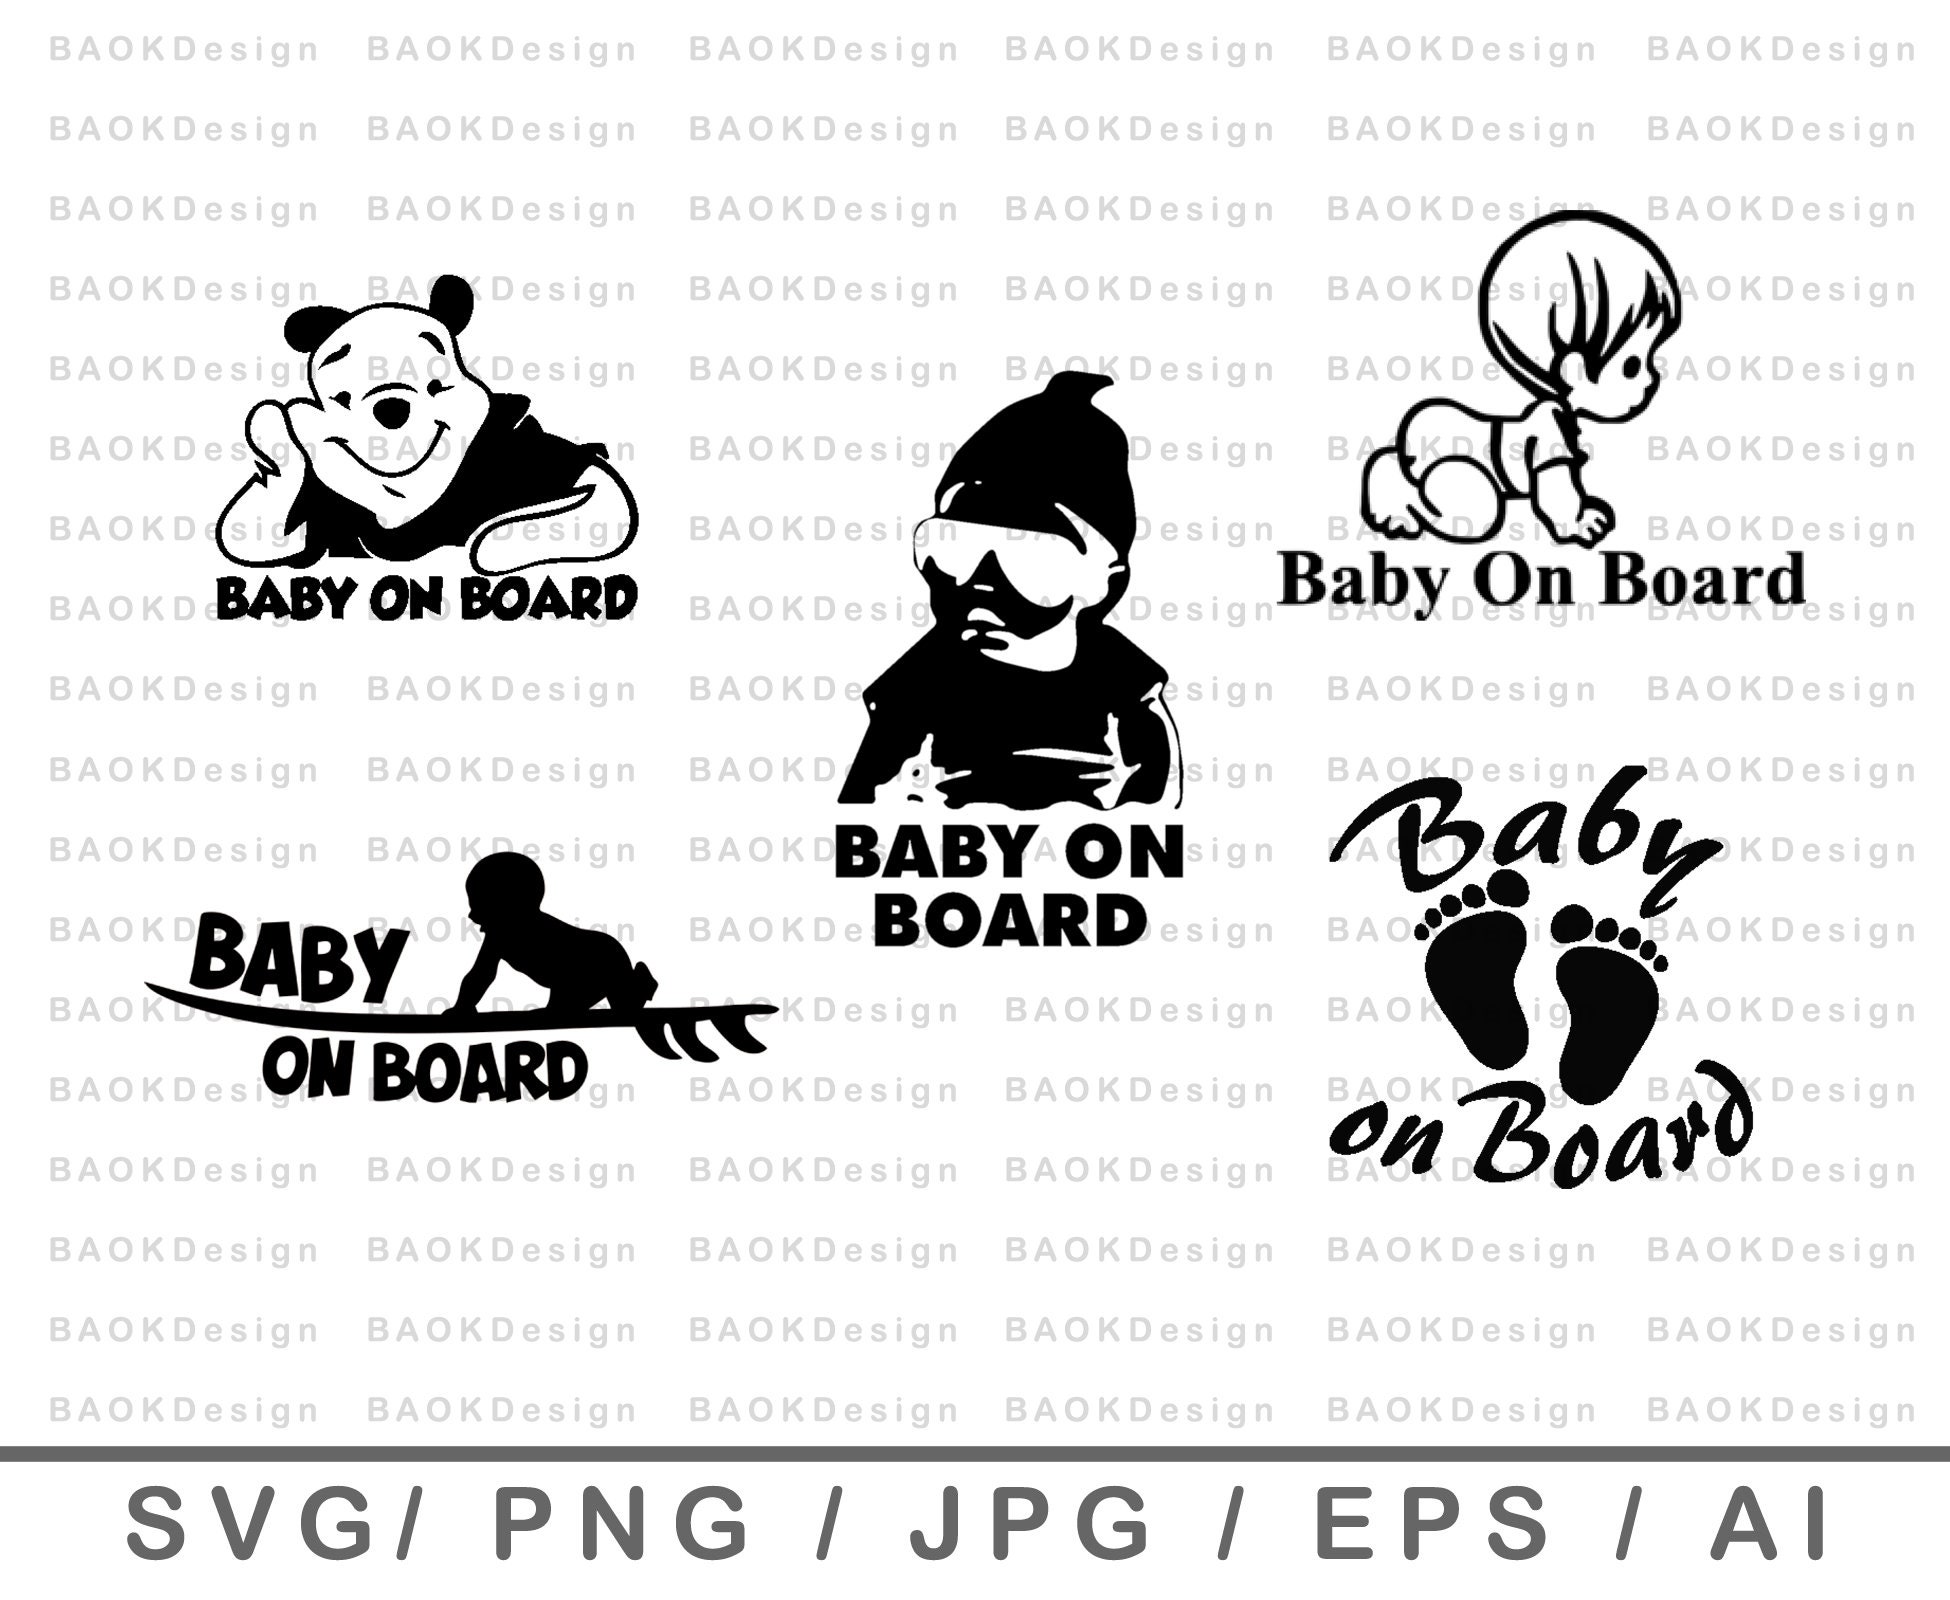 Baby on Board Svg, Car Stickers Labels, Vinyl Decals, Banners, Round Design  with Heart and Feet, Vehicle Newborn Baby Sign - Imagefied